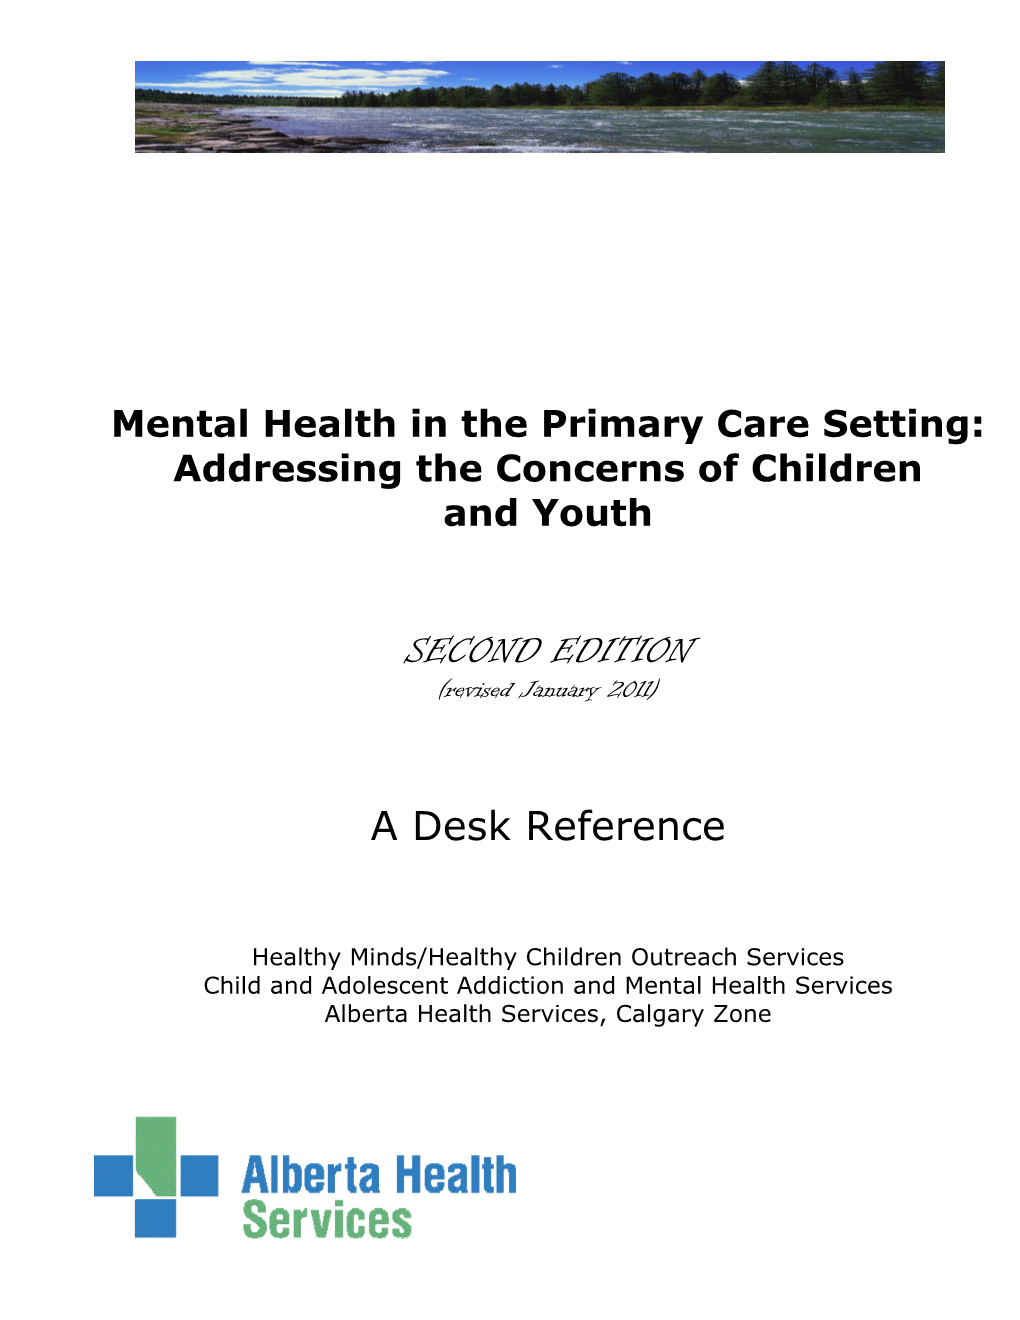 Mental Health in the Primary Care Setting: Addressing the Concerns of Children and Youth